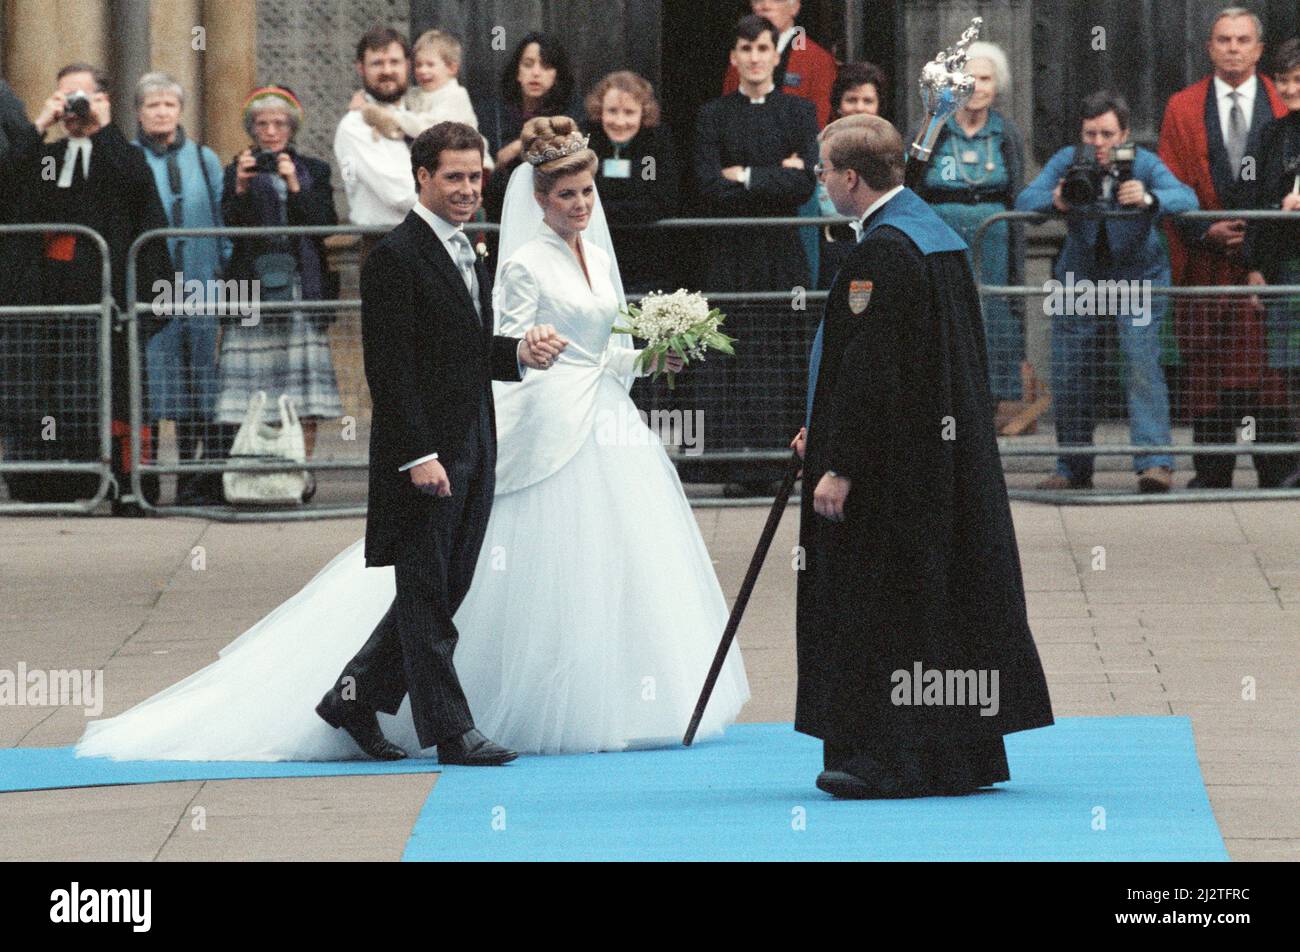 The Wedding of David Armstrong-Jones, Viscount Linley, to Serena Stanhope, at St Margaret's Church, Westminster. 8th October 1993. Stock Photo